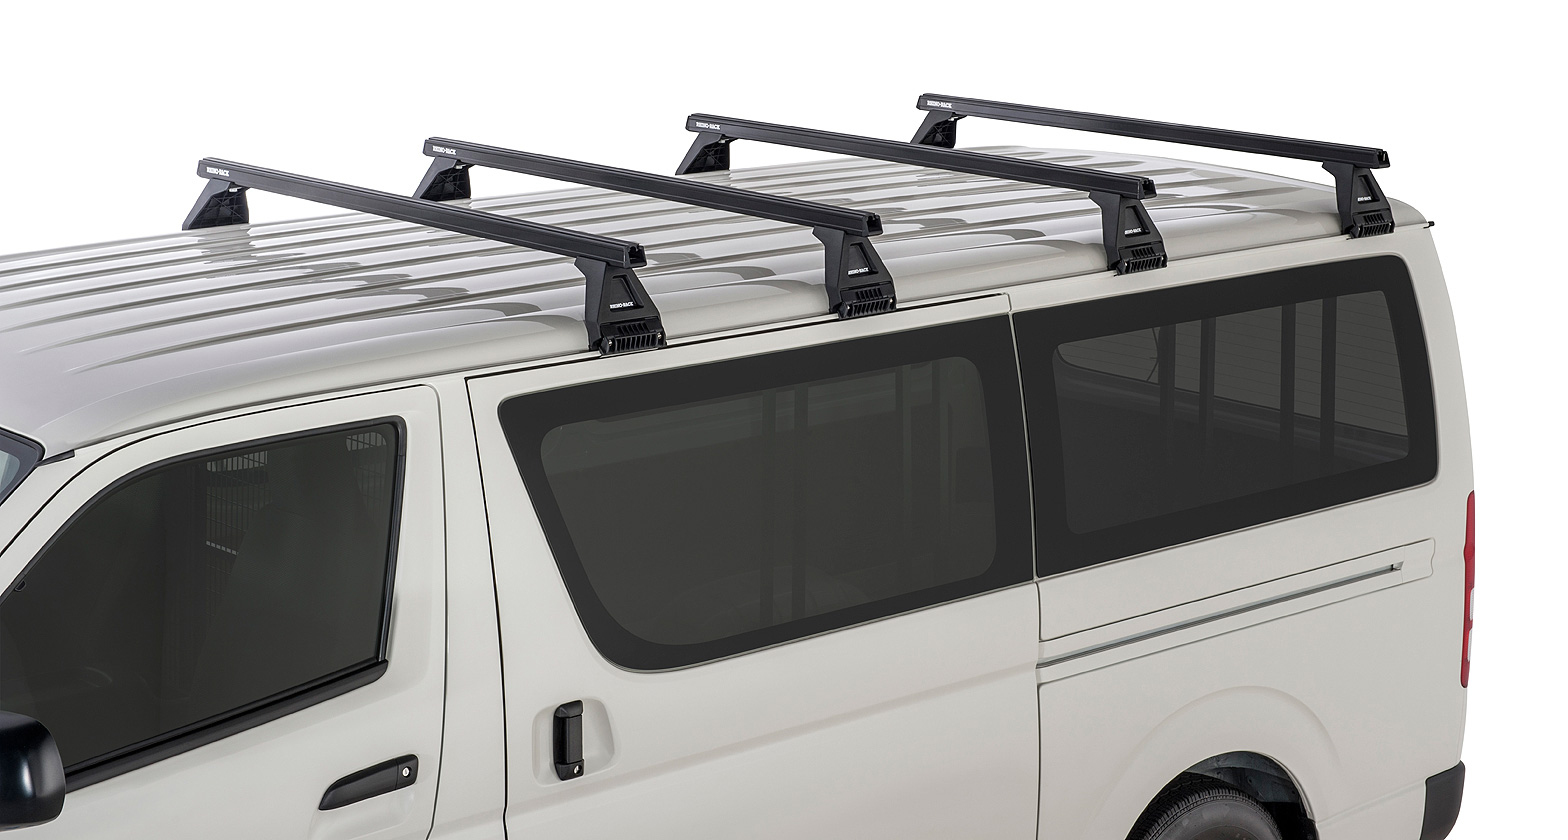 Rhino Rack JA0847 Heavy Duty RL150 Black 4 Bar Roof Rack for Toyota Hiace H200 4dr LWB Low Roof with Rain Gutter (2005 to 2019) - Gutter Mount